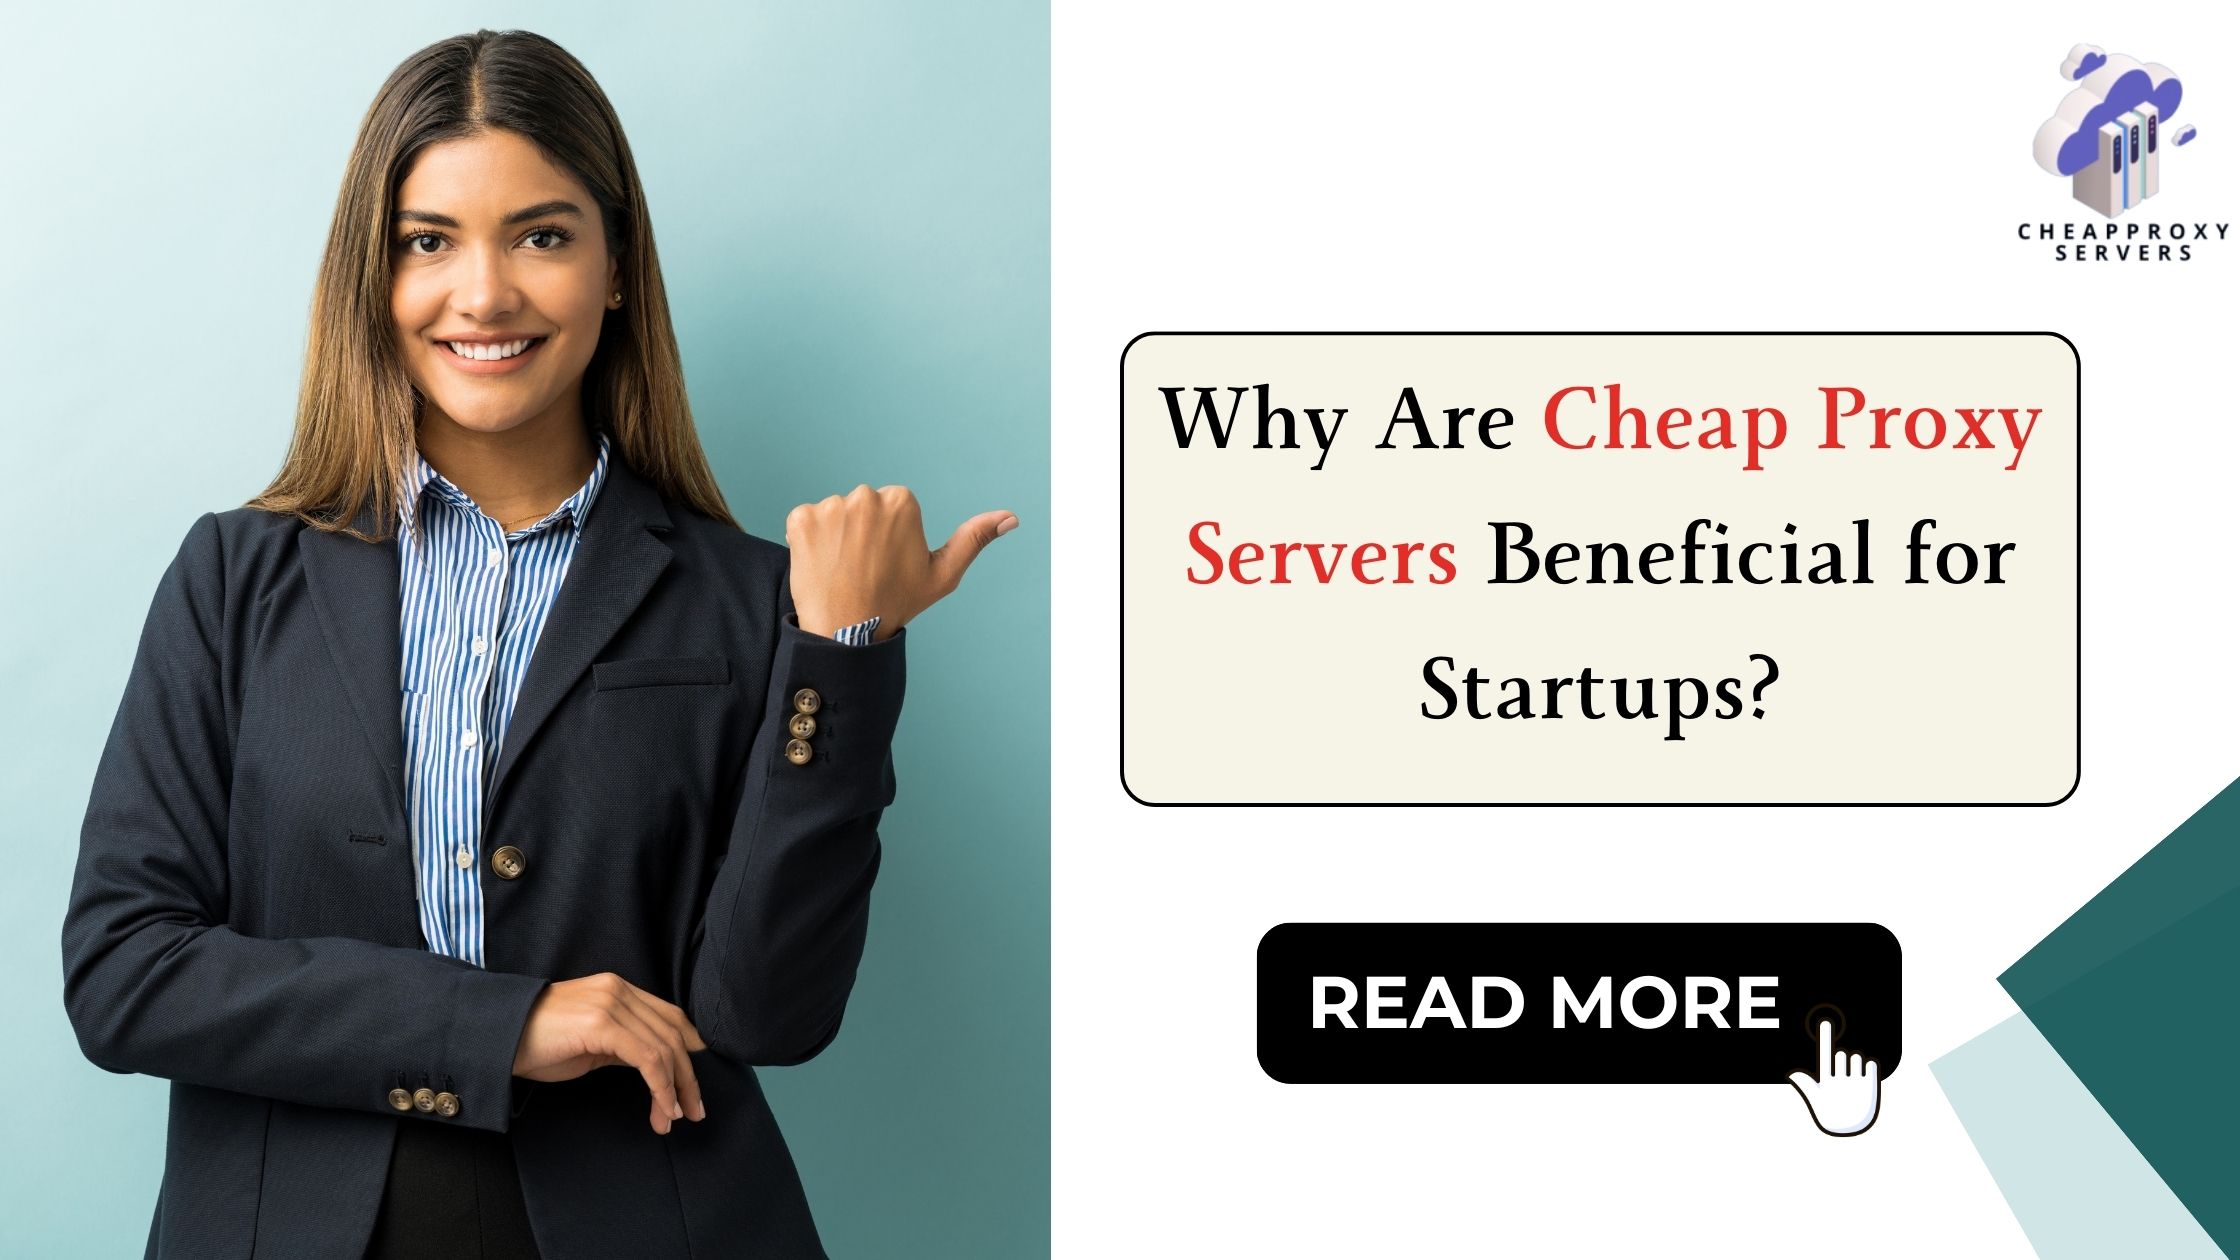 Why Are Cheap Proxy Servers Beneficial for Startups?